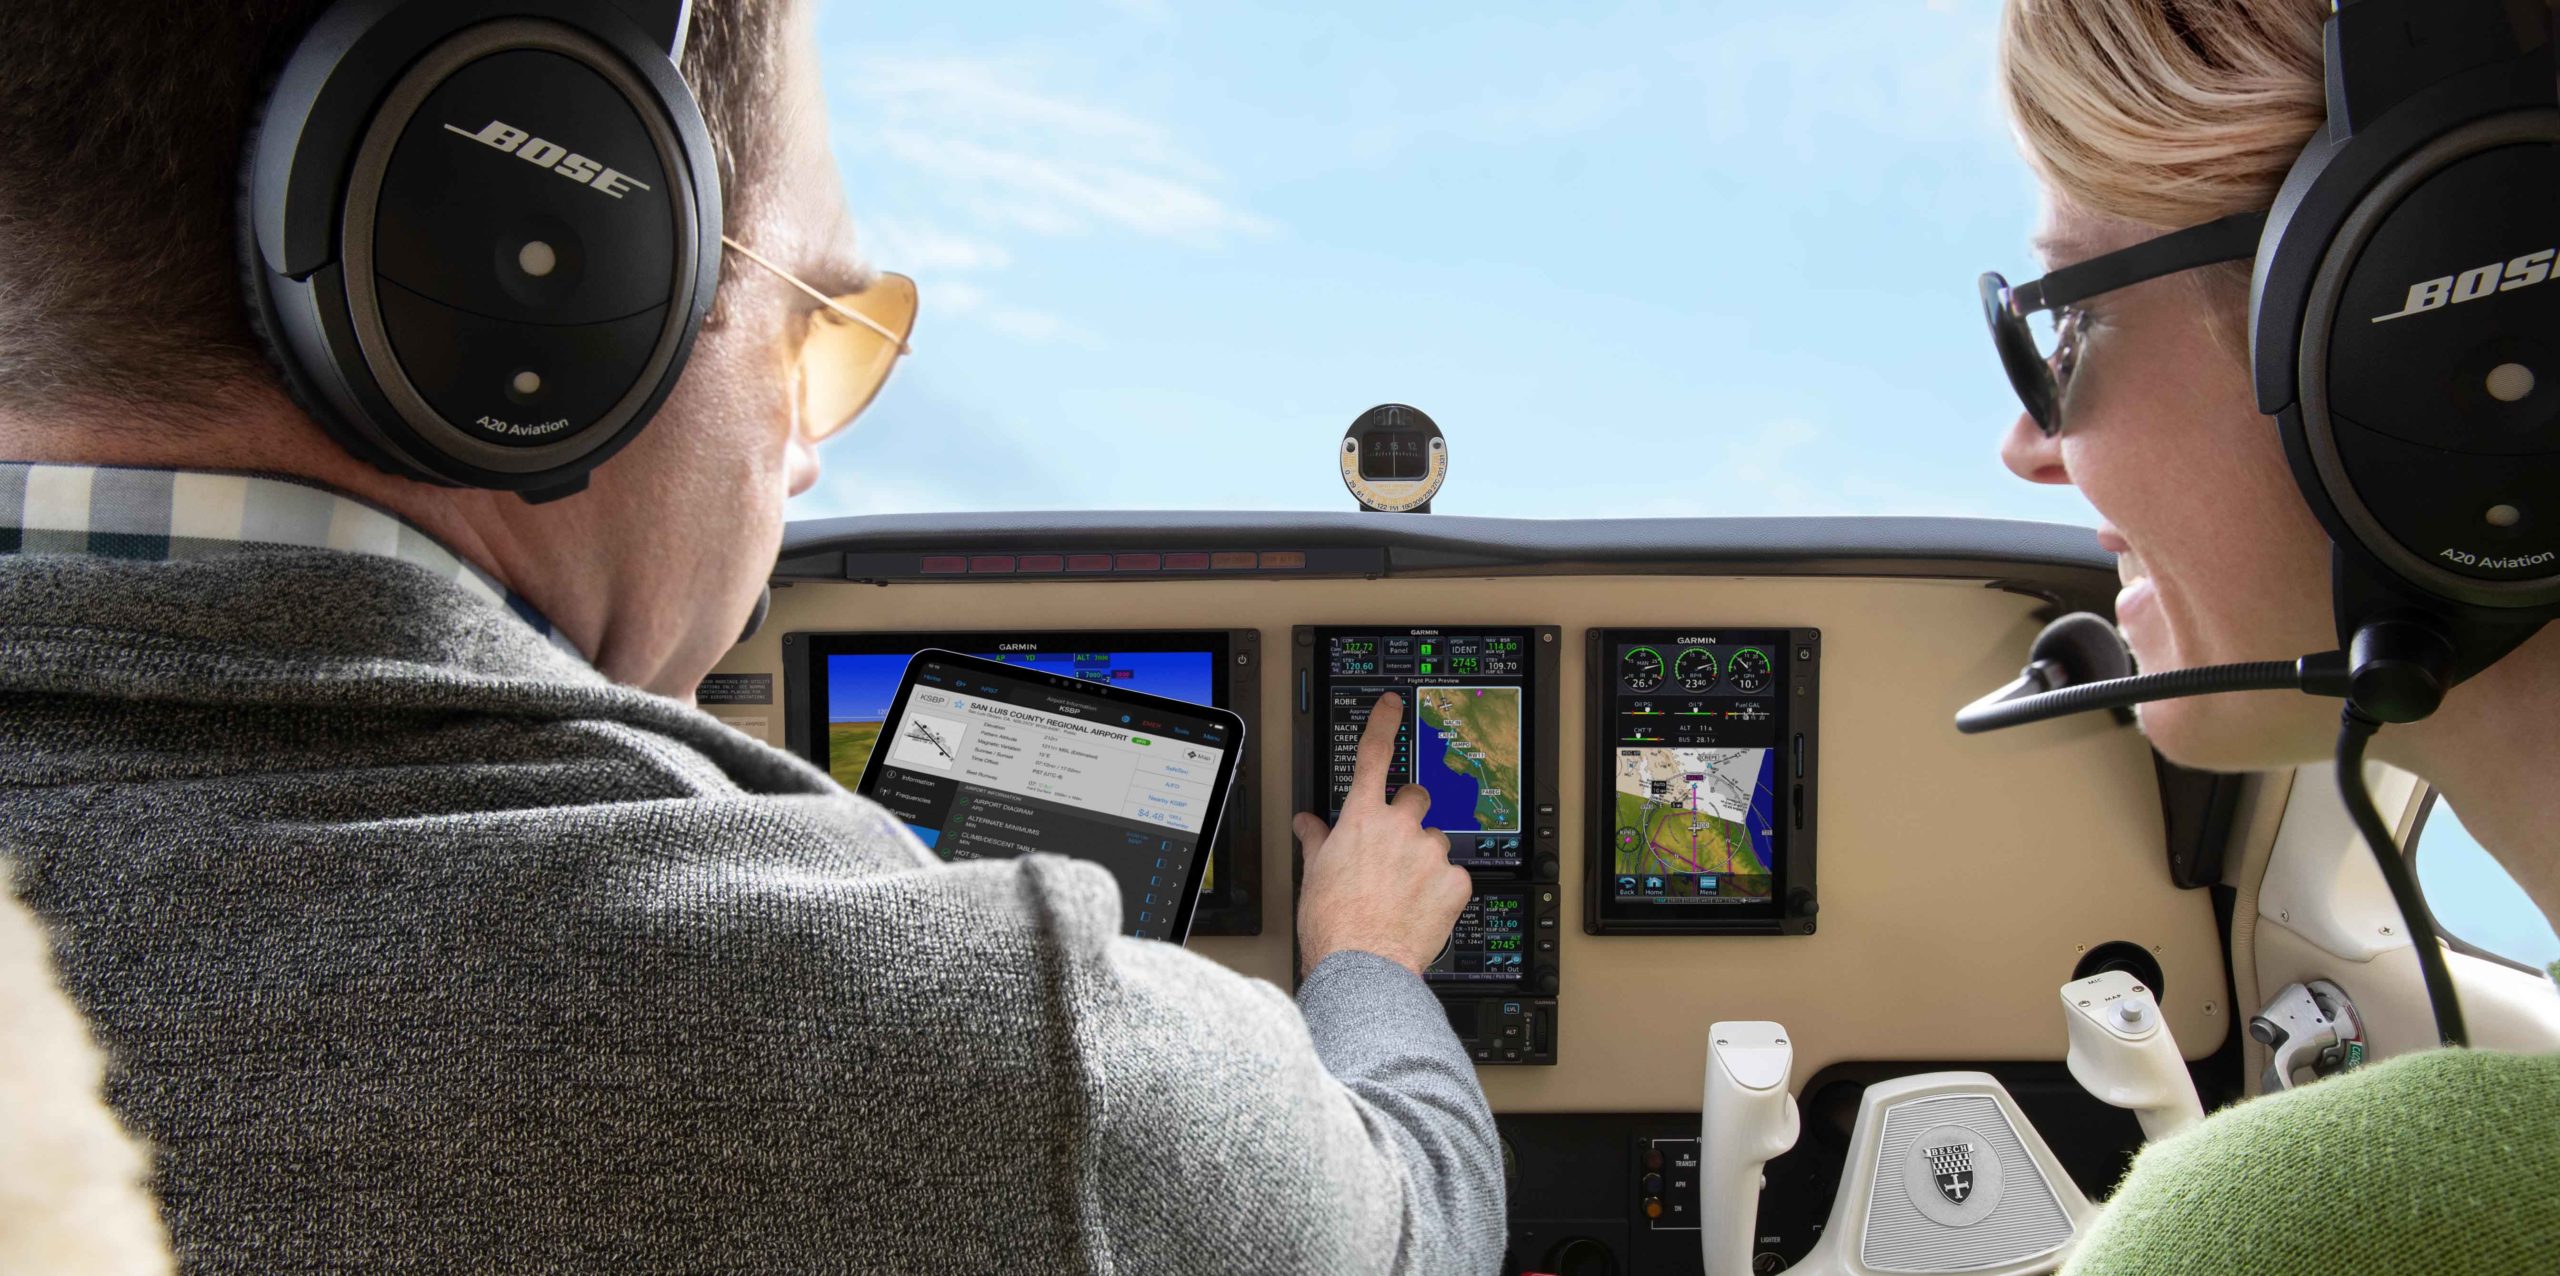 Two pilots in aircraft cockpit interacting with Garmin avionics